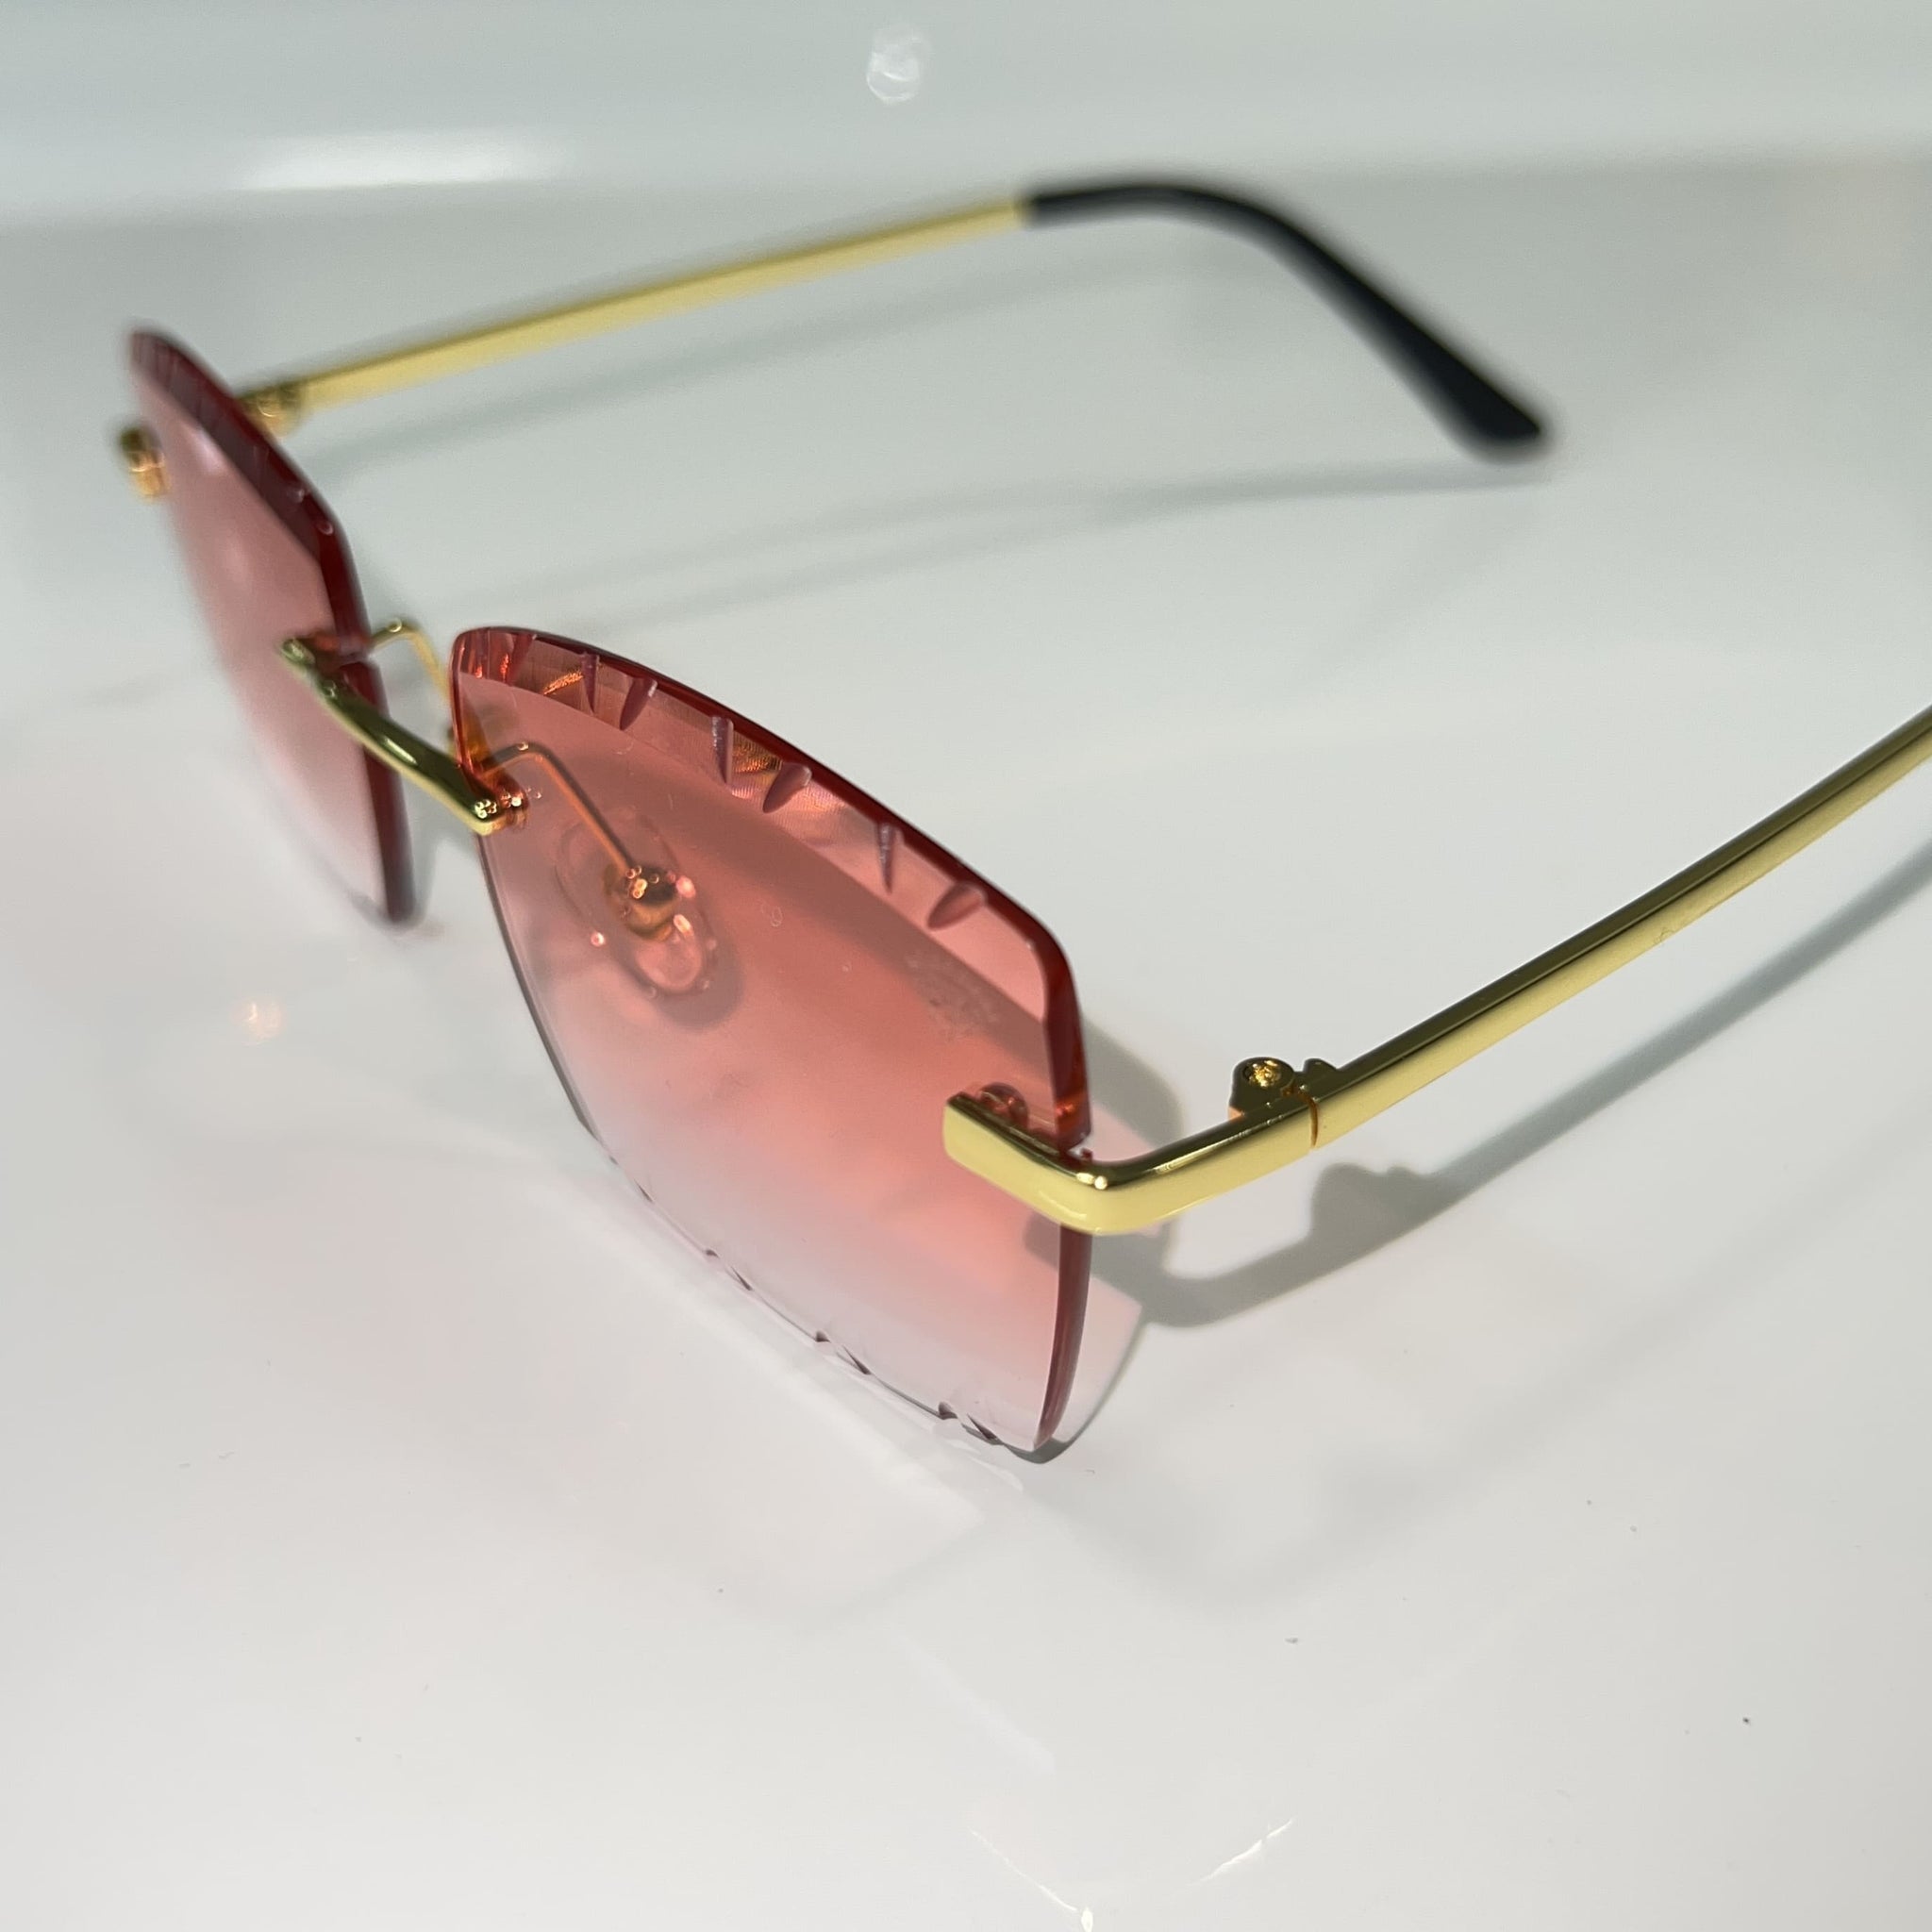 Dripcut Glasses - 14k gold plated - Pink Shade - Sehgal Glasses